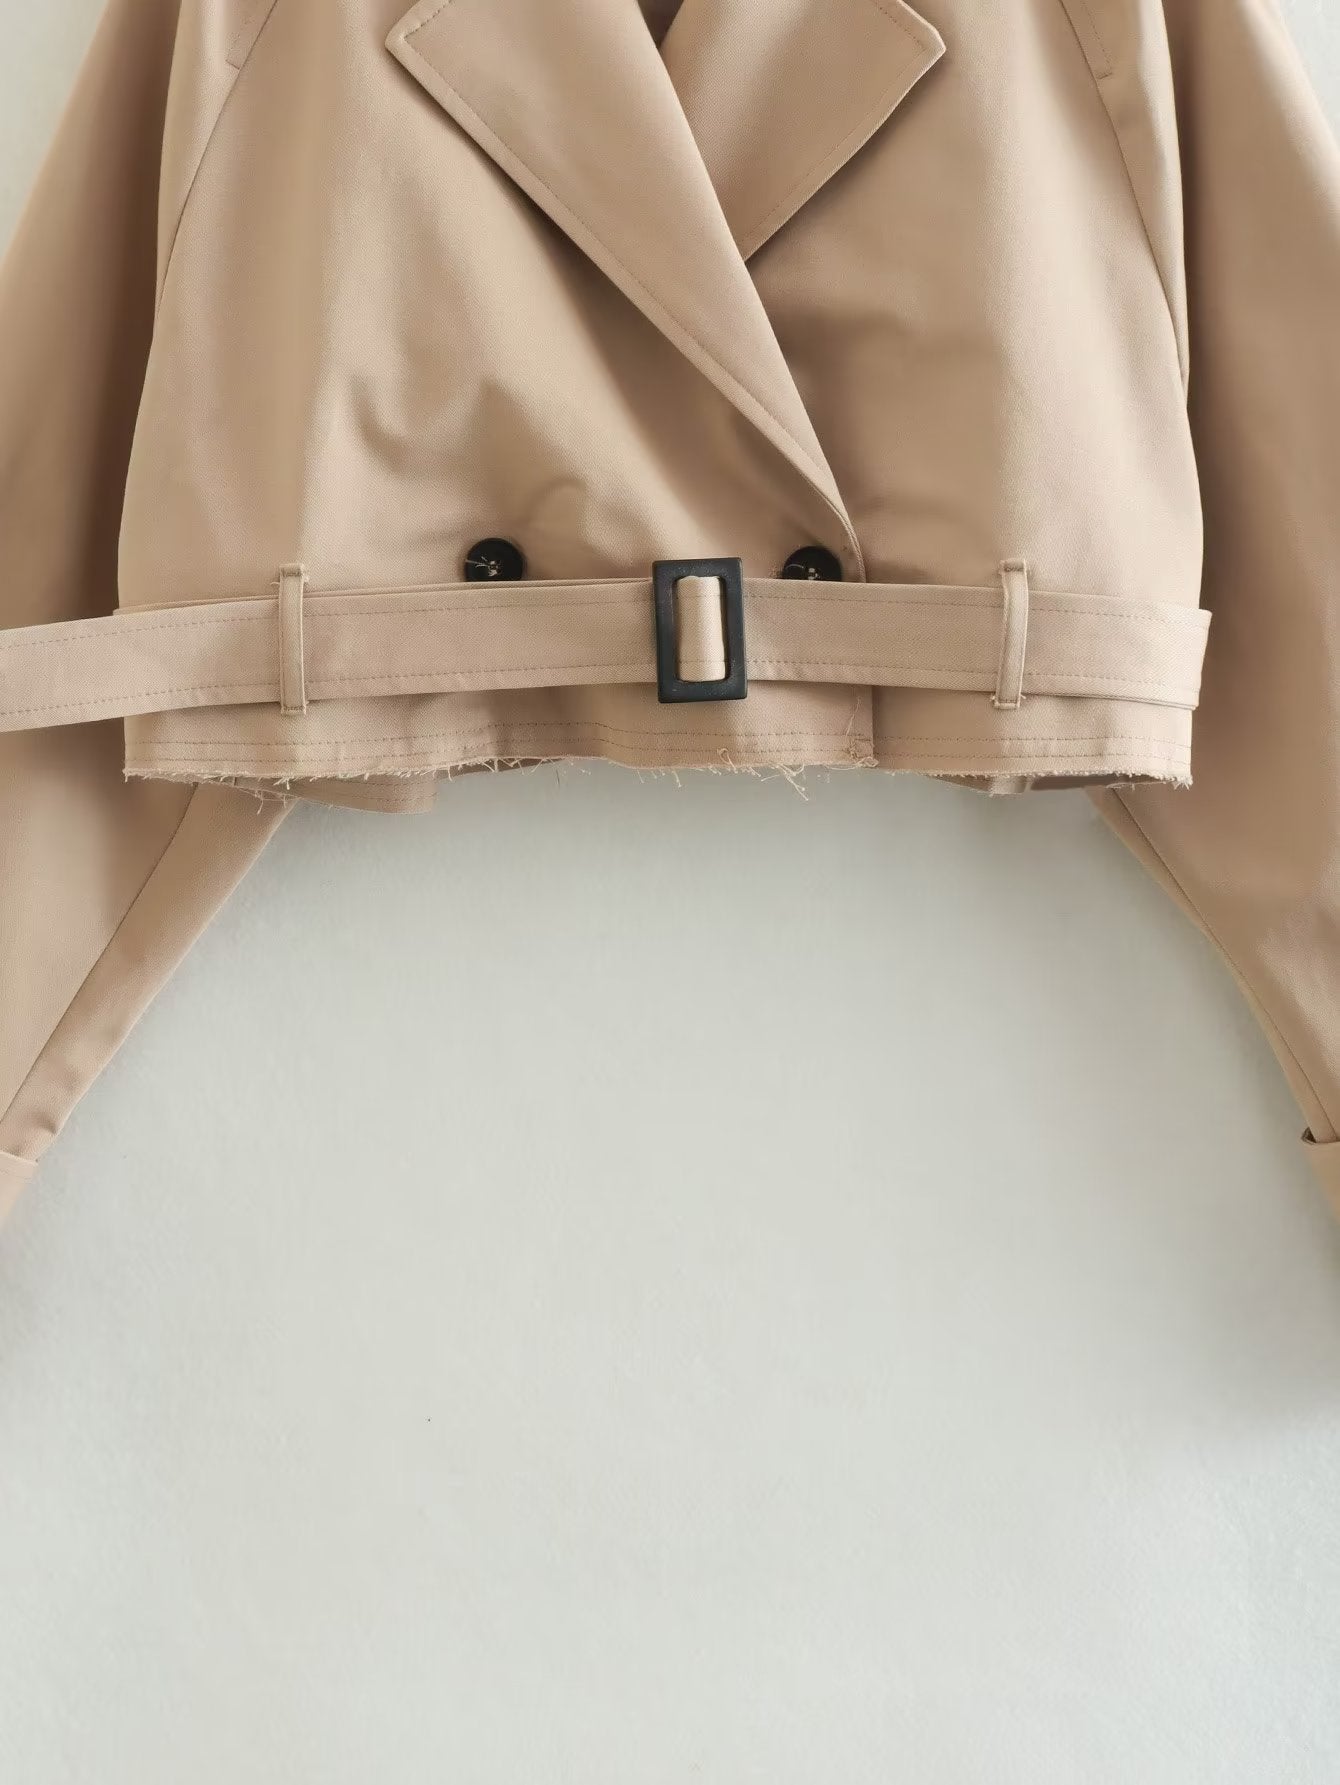 ESTELLE CROPPED TRENCH COAT